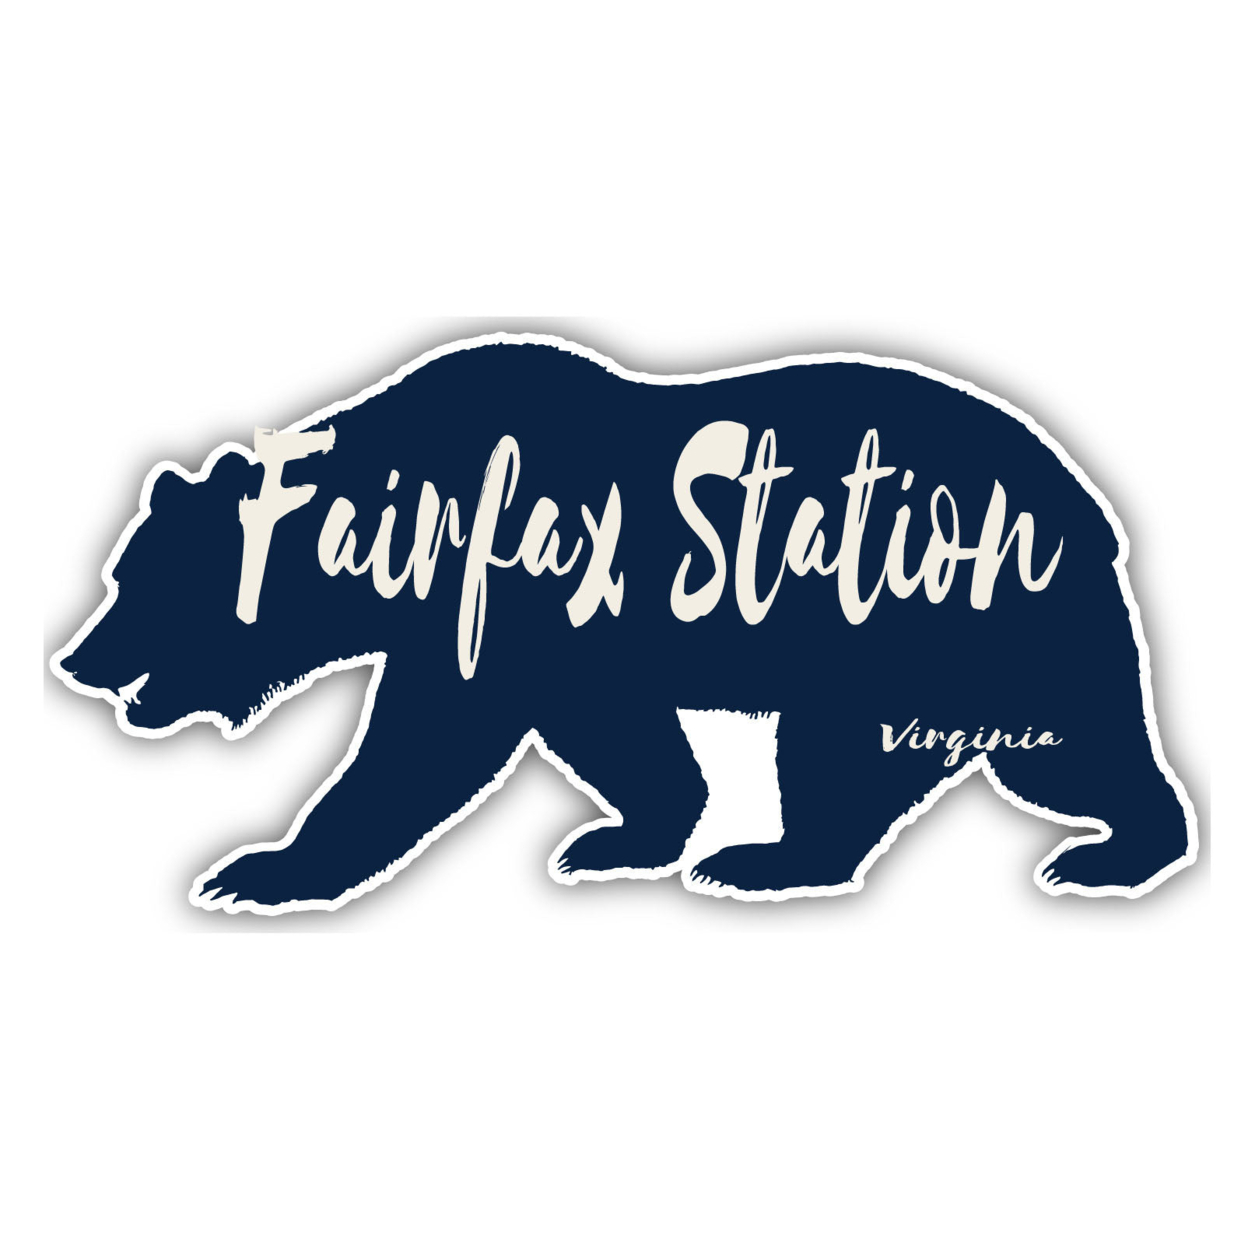 Fairfax Station Virginia Souvenir Decorative Stickers (Choose Theme And Size) - 4-Pack, 6-Inch, Bear